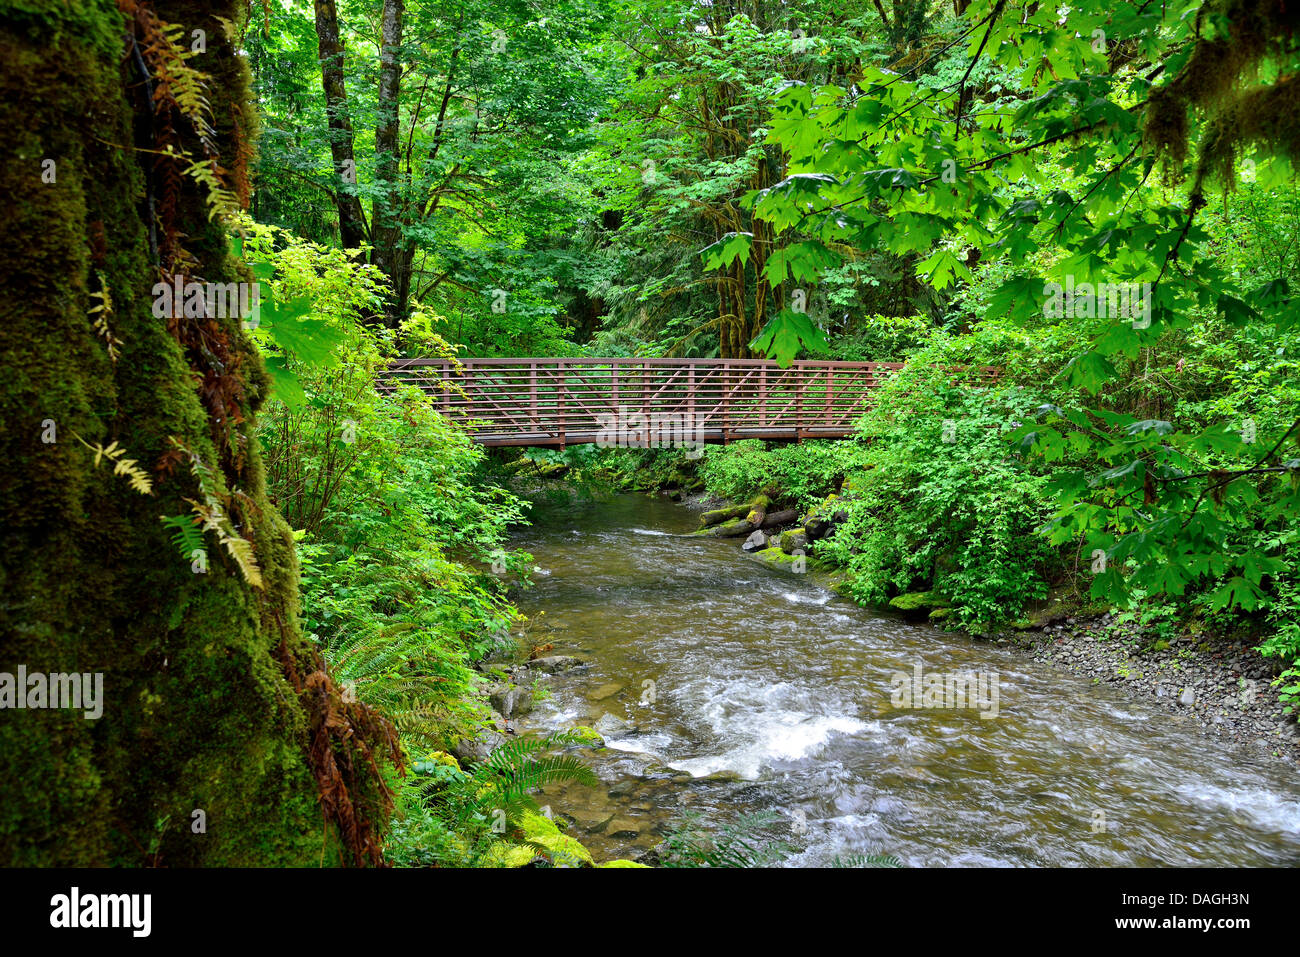 A small bridge over a running creek in lush green rain forest. Olympic National Park, Washington, USA. Stock Photo